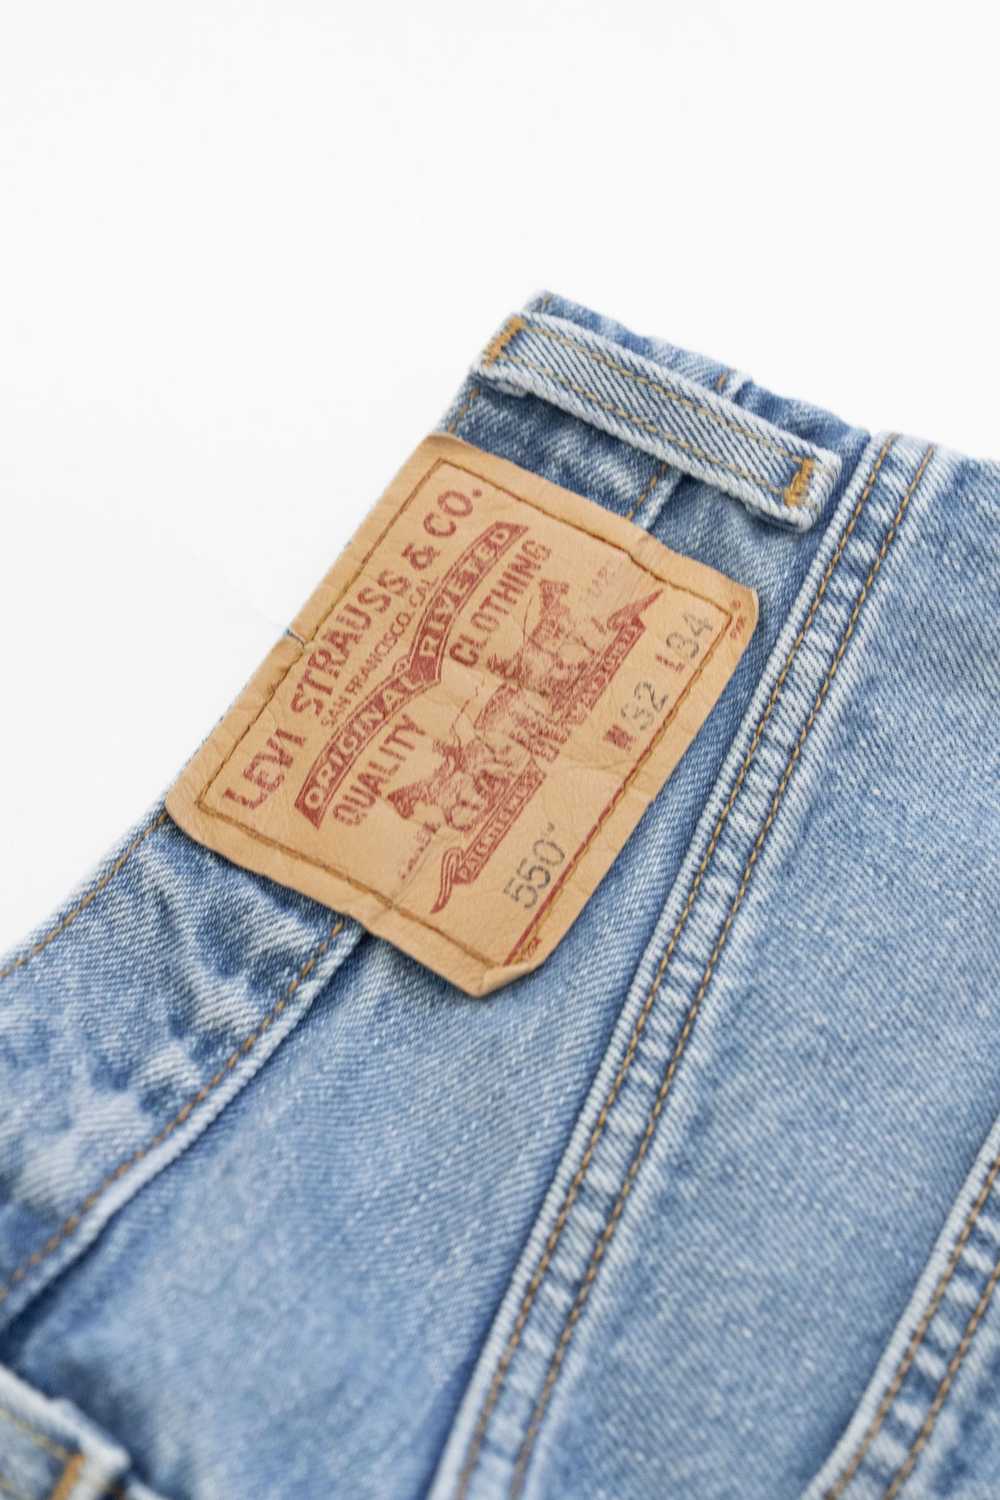 Levi's × Streetwear Levi's 550 Relaxed Fit jeans - image 4